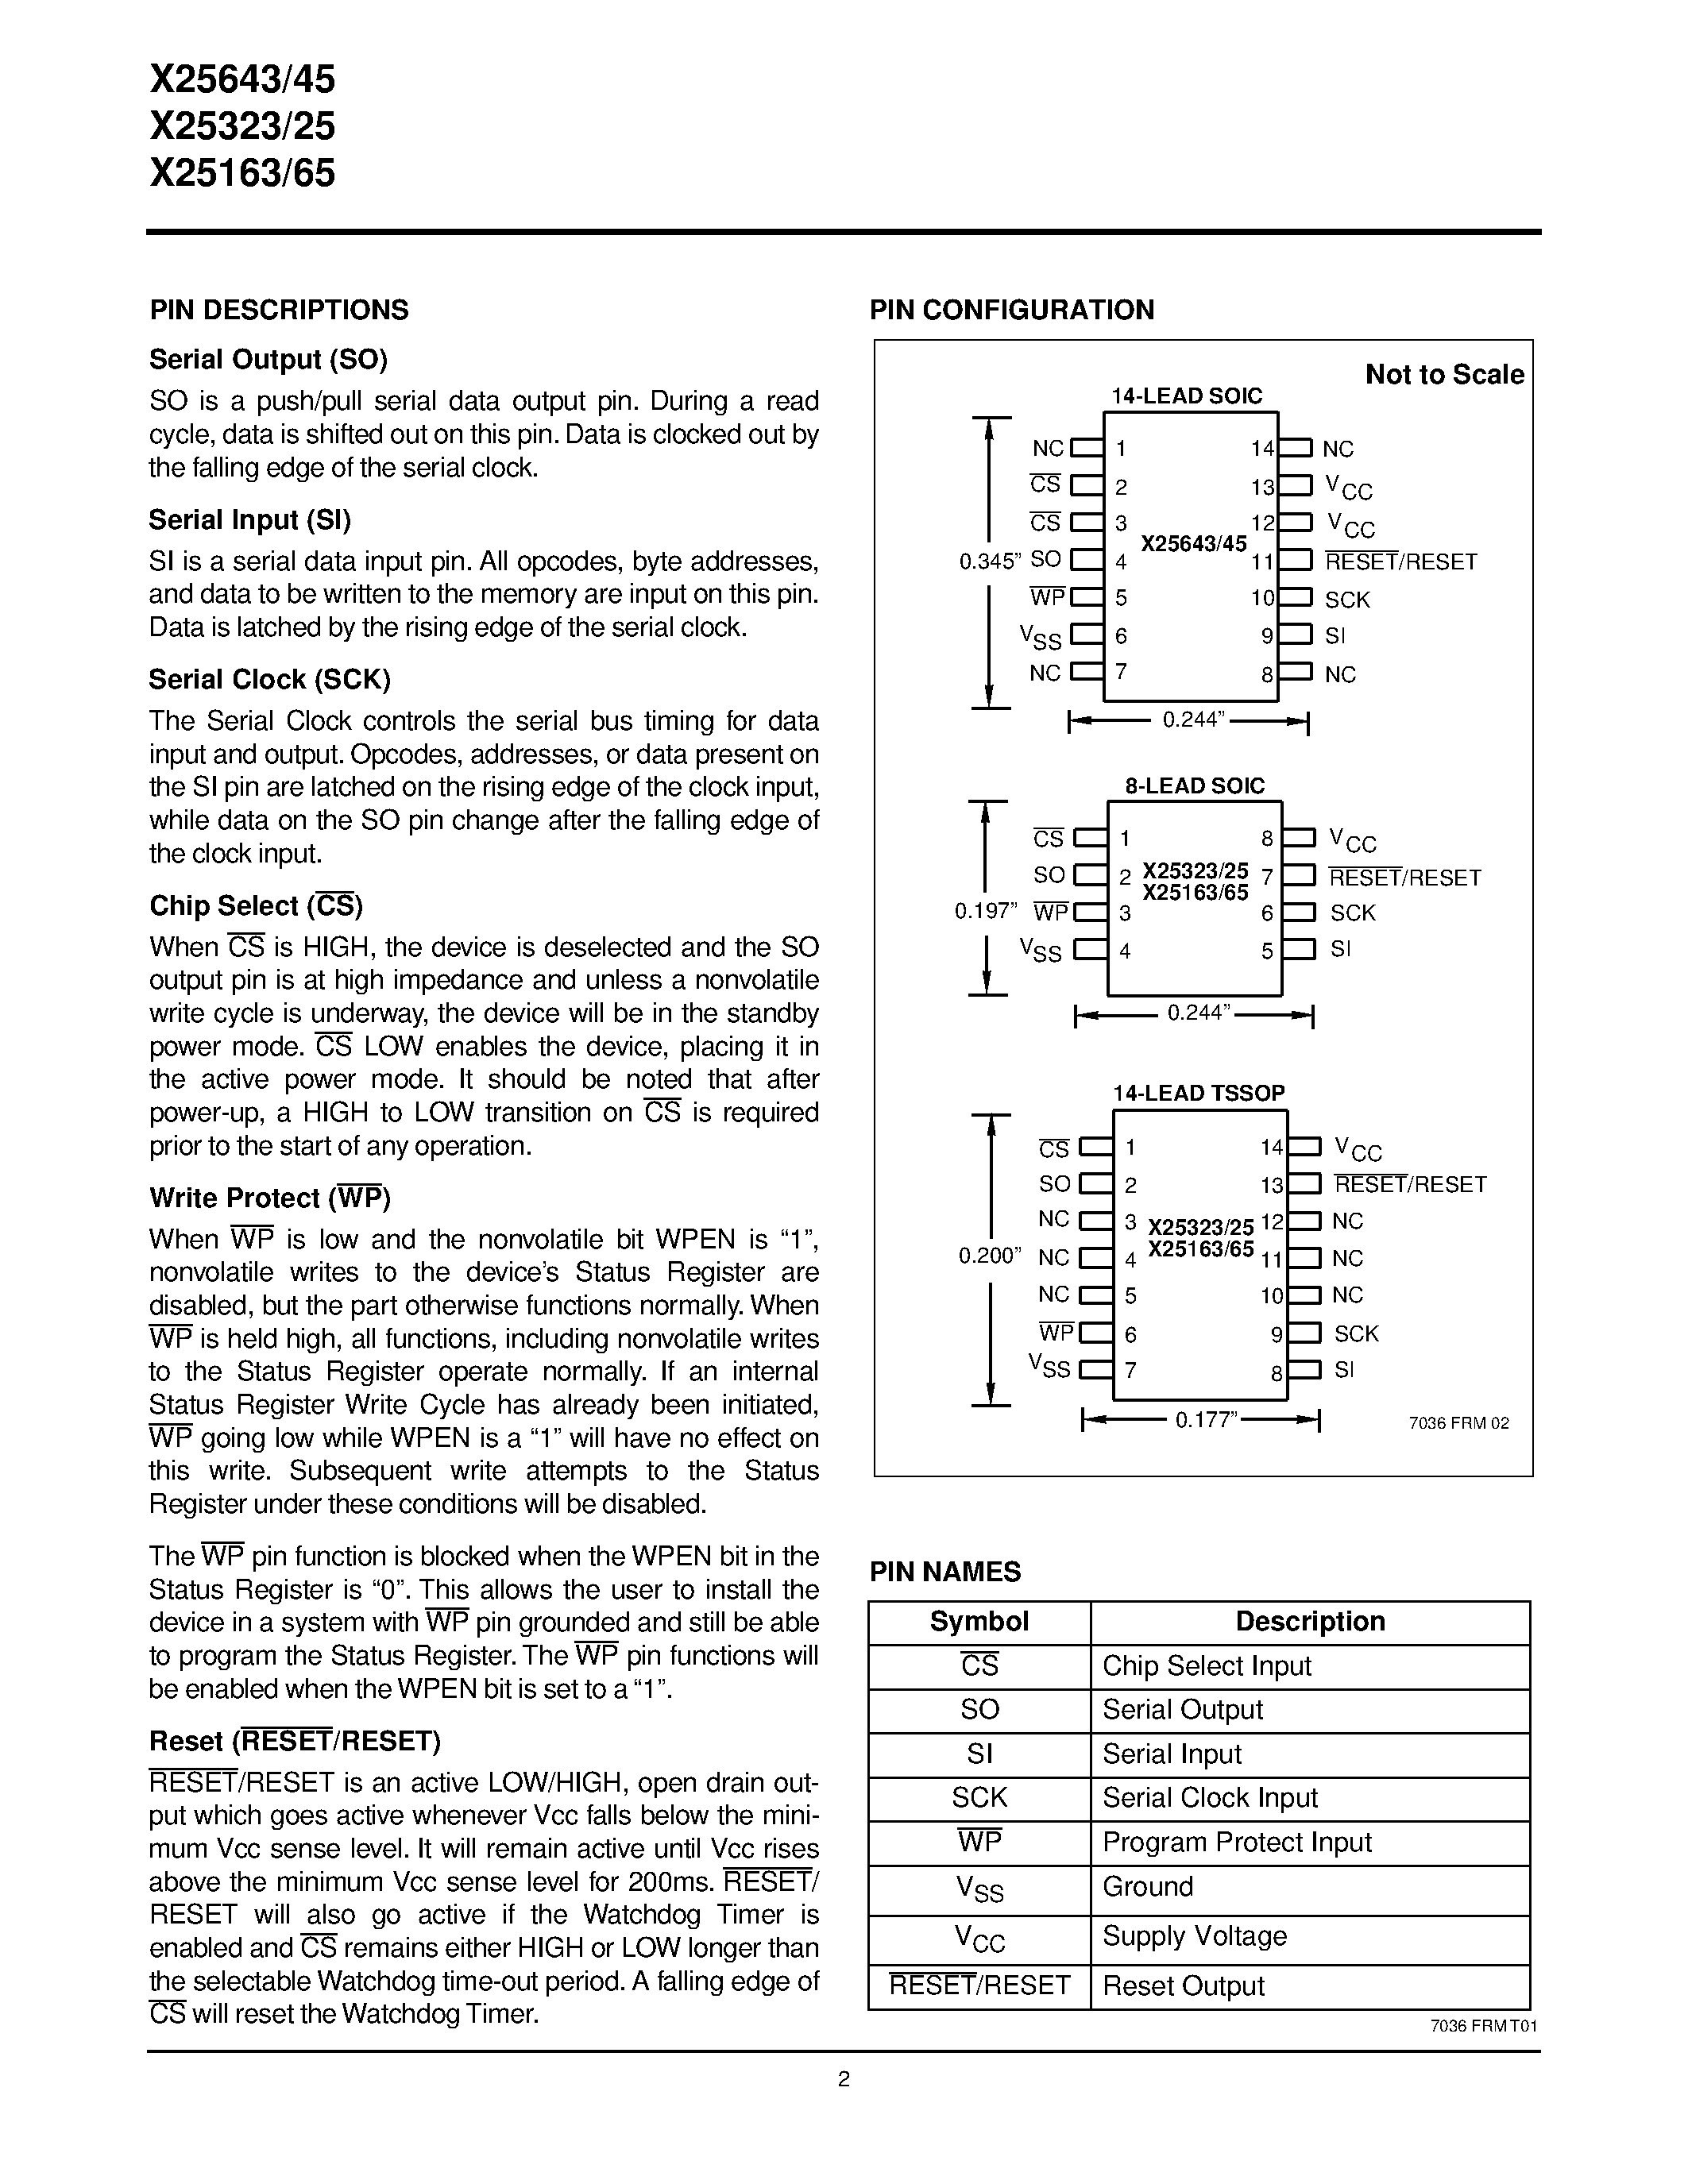 Datasheet X25325S8-1.8 - Programmable Watchdog Timer & V CC Supervisory Circuit w/Serial E 2 PROM page 2